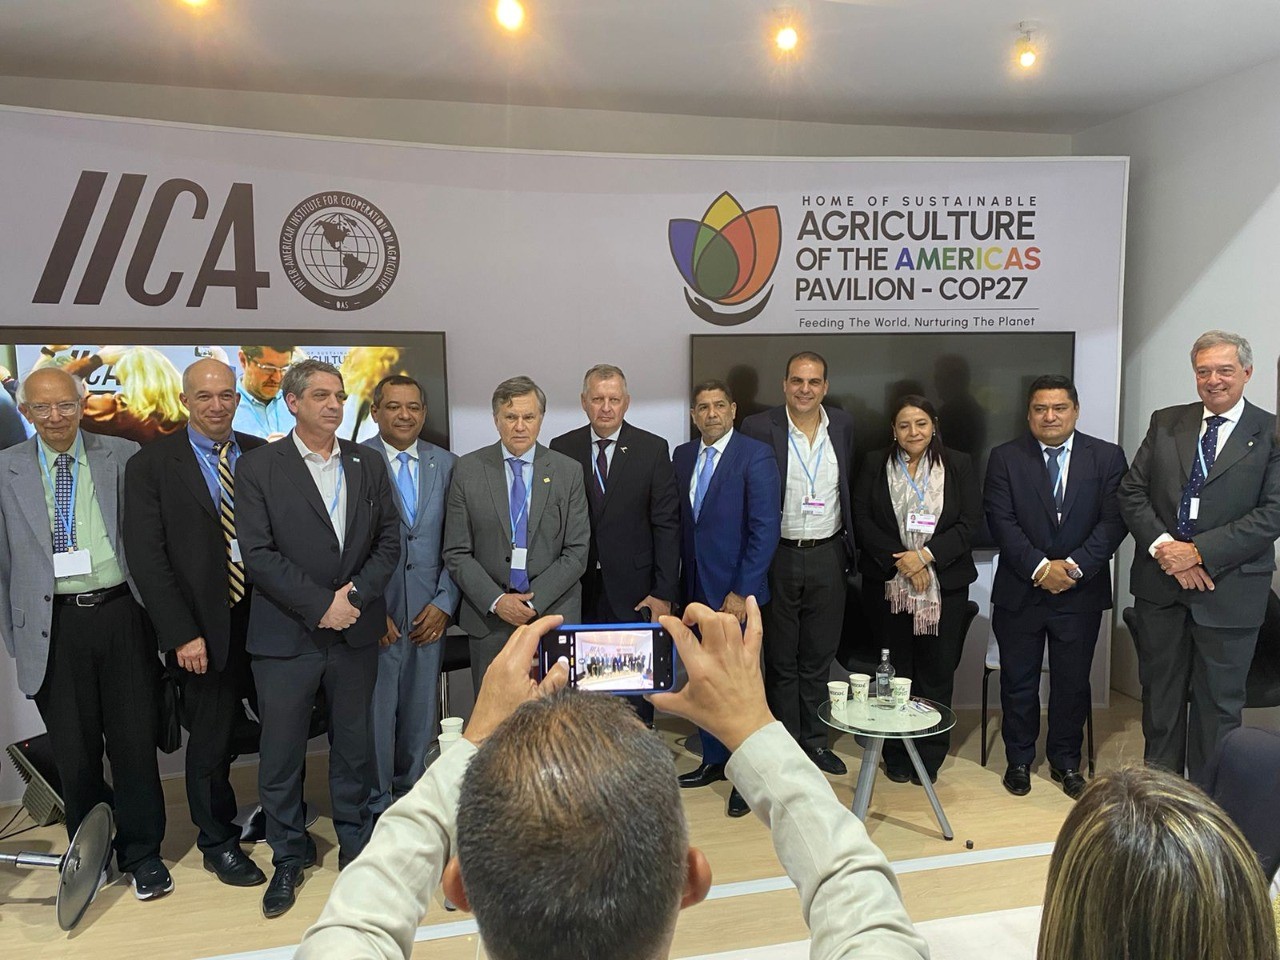 Ministers of Agriculture of the Americas maintain that food security is essential for sustainability